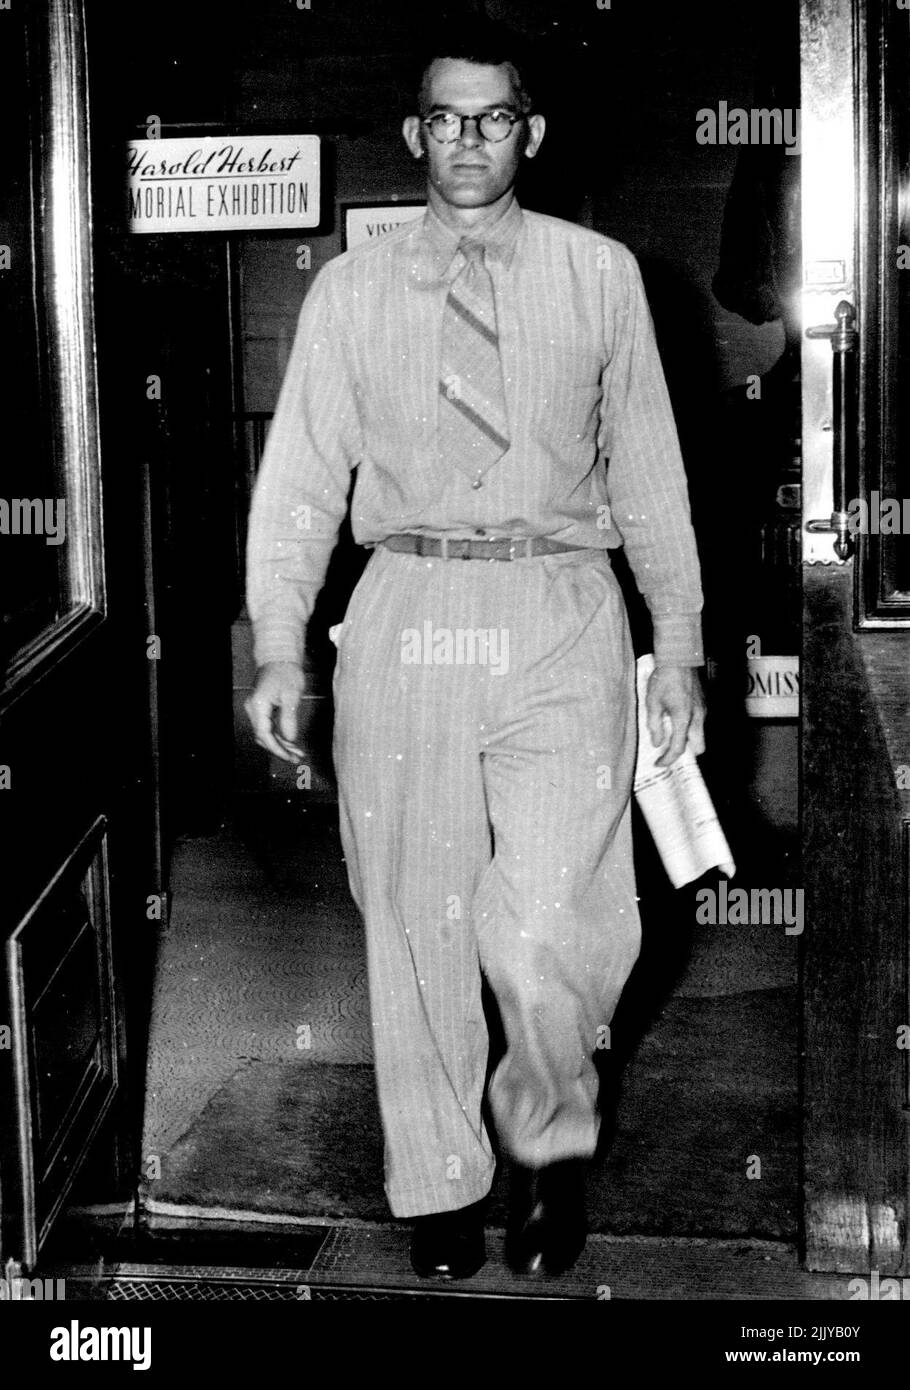 Mr Hal Missingham, director of the National Art Gallery Sydney, was asked to leave the Commercial Travellers' club, Sydney, for being "improperly dressed." Mr Missingham was wearing a shirt-suit (shown in picture). He regards the suit as "cool and rational" summer attire. December 4, 1945. (Photo by Associated Newspapers Ltd.). Stock Photo